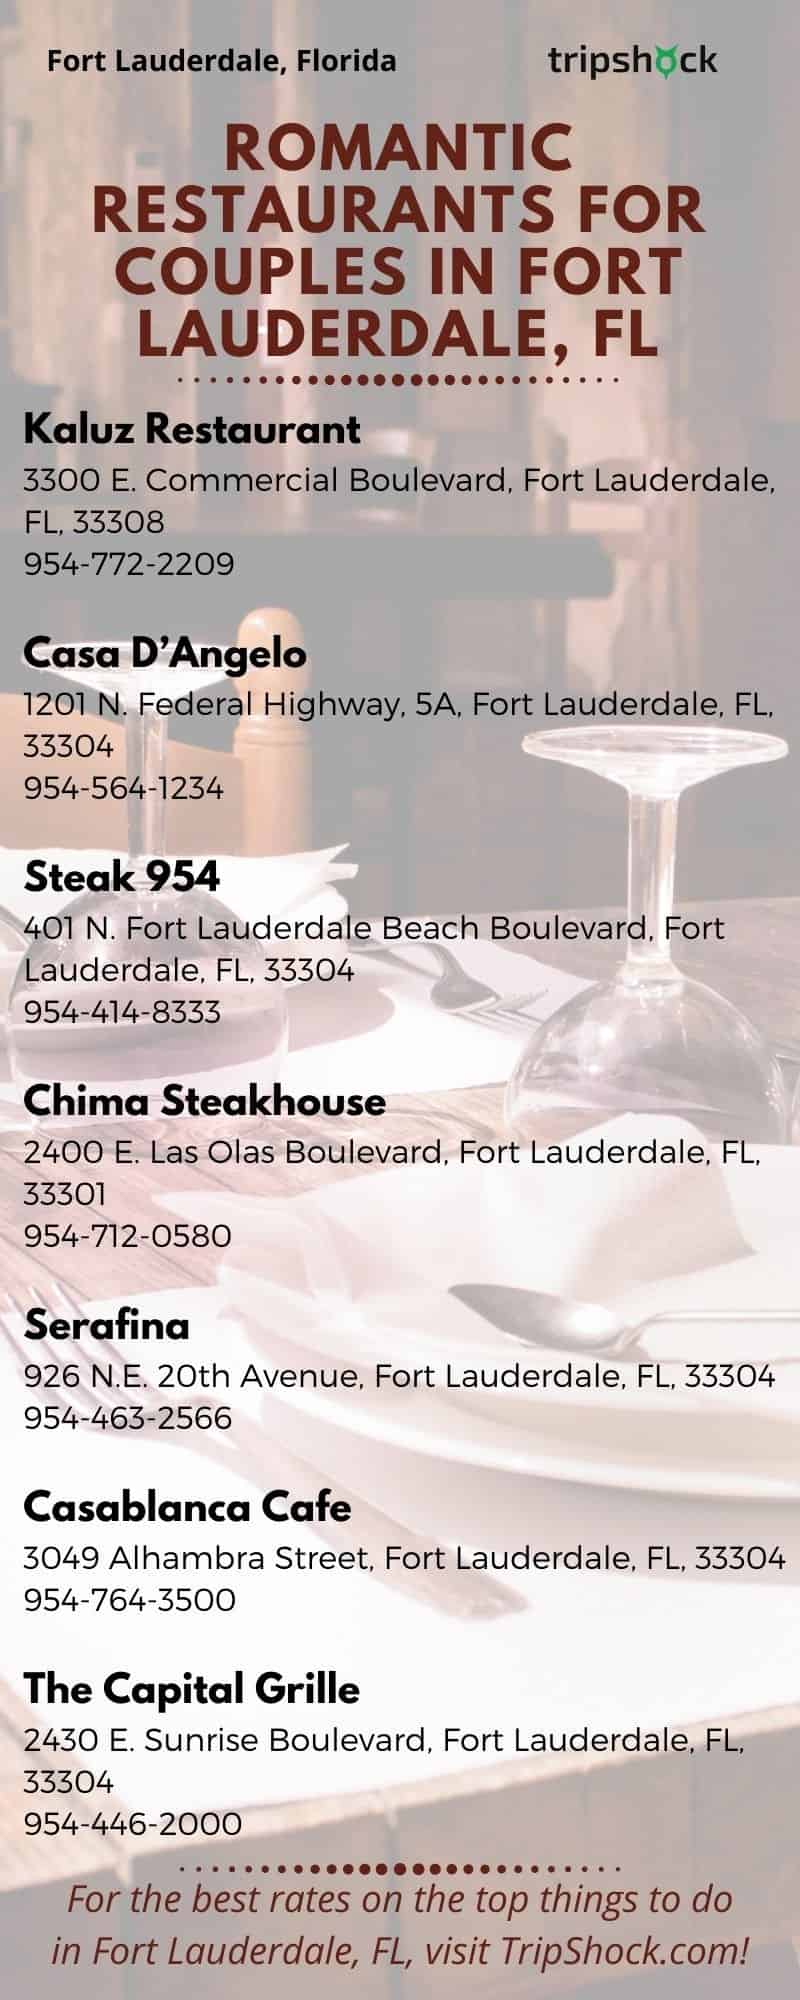 10 Best Things to do for Couples in Fort Lauderdale, FL